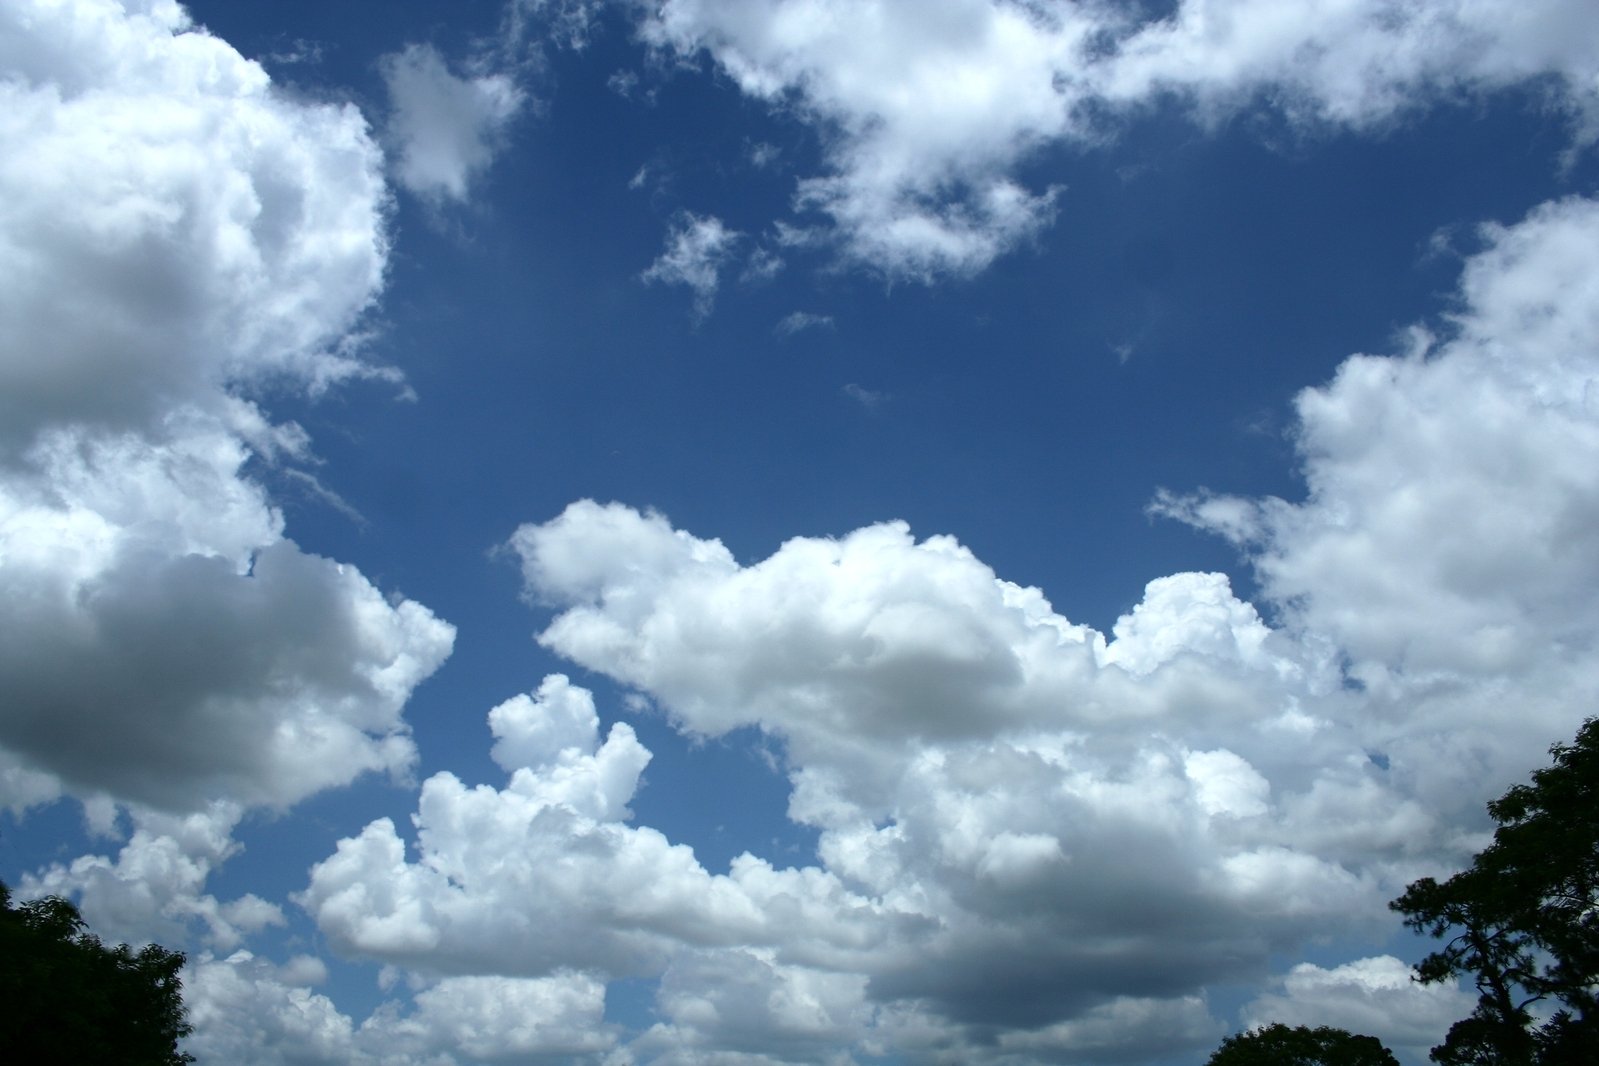 many clouds are visible in the blue sky